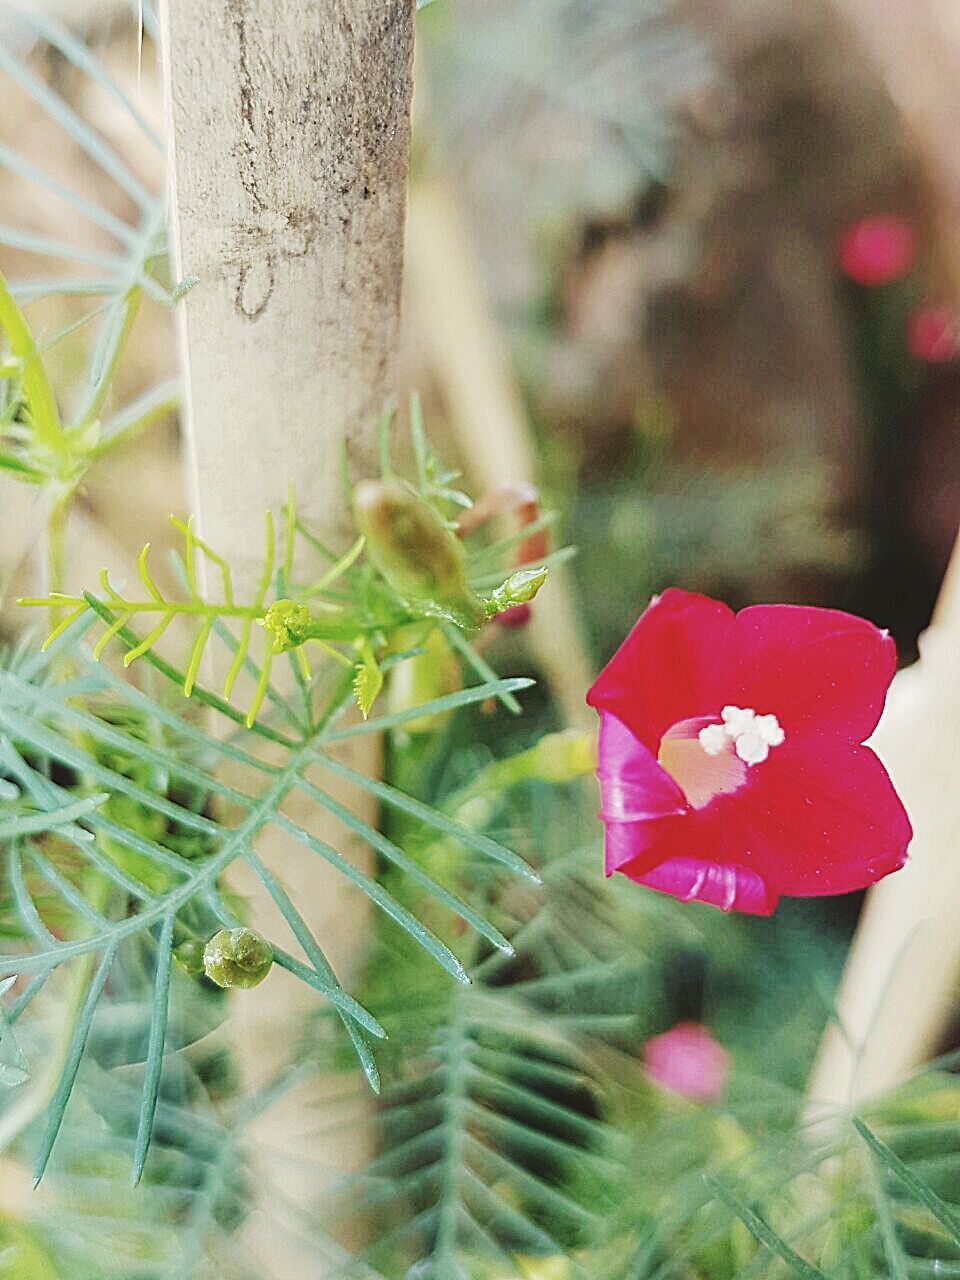 CLOSE-UP OF RED FLOWER AND PLANT